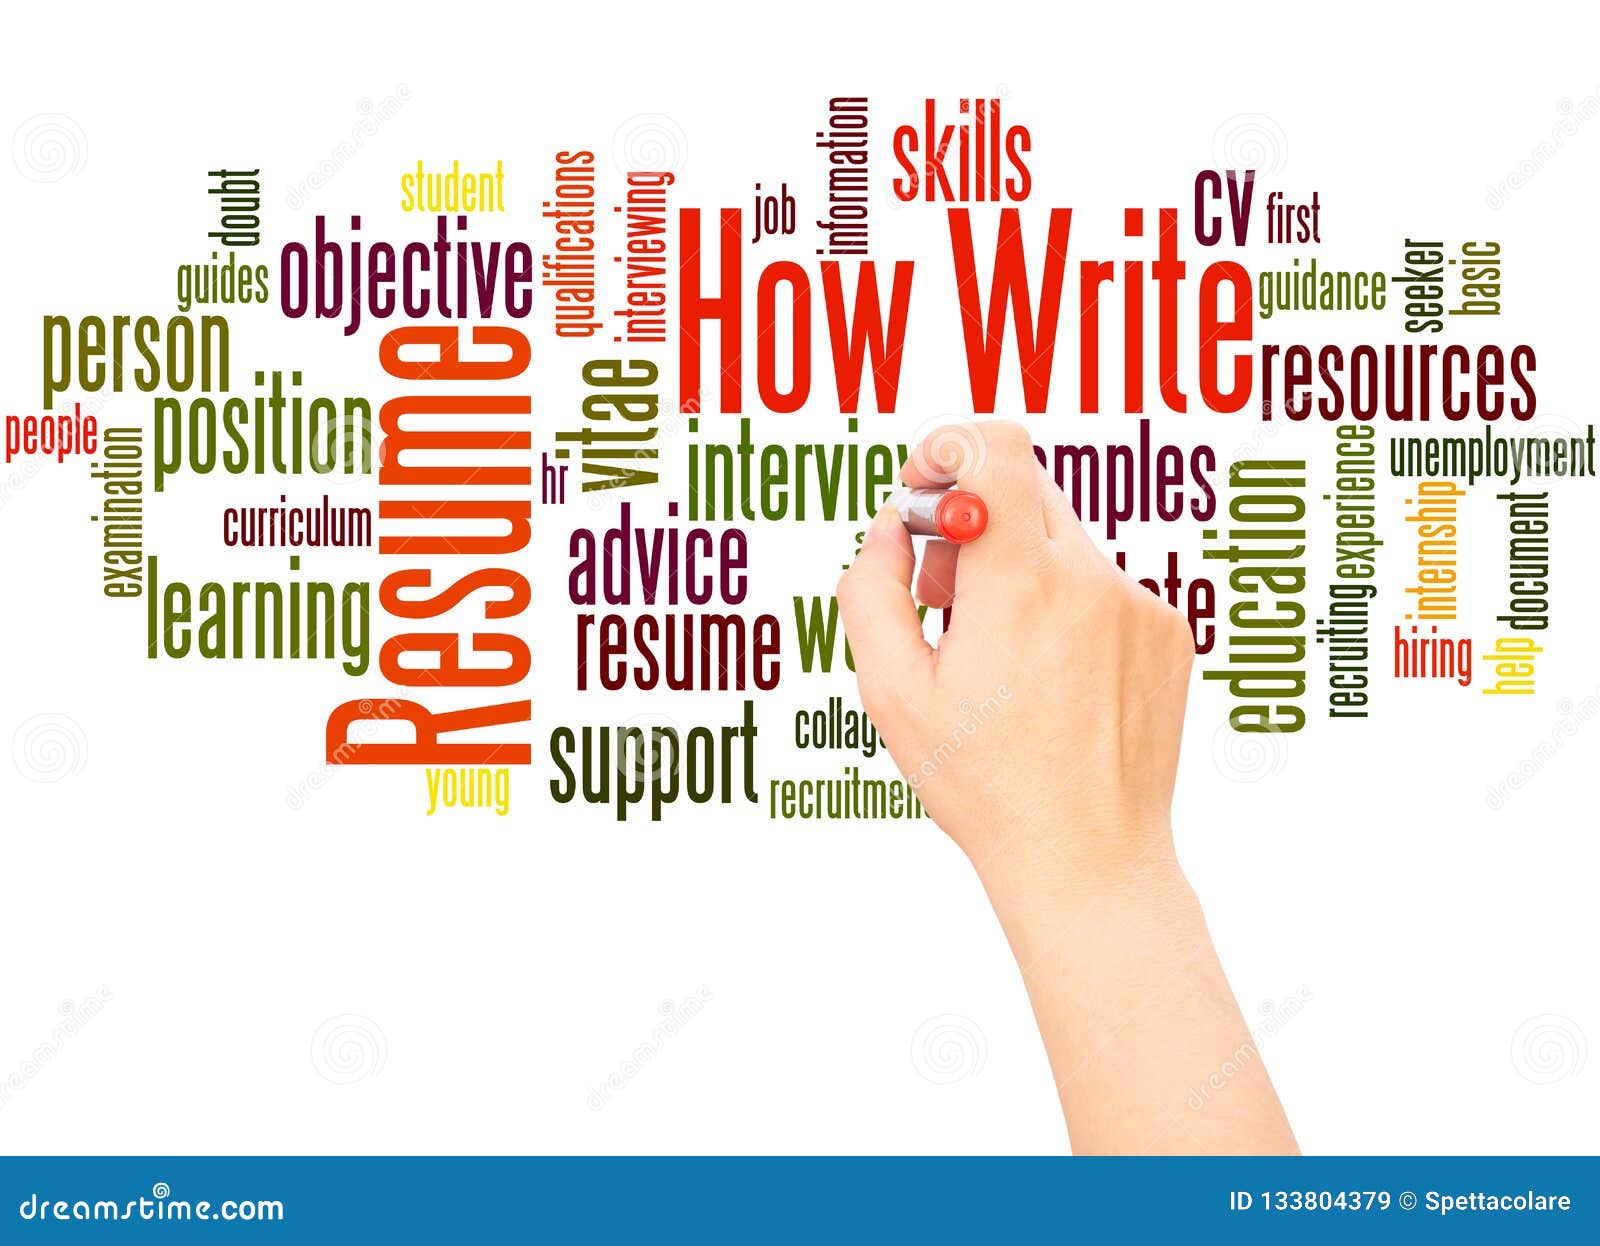 How Write Resume Word Cloud Hand Writing Concept Stock